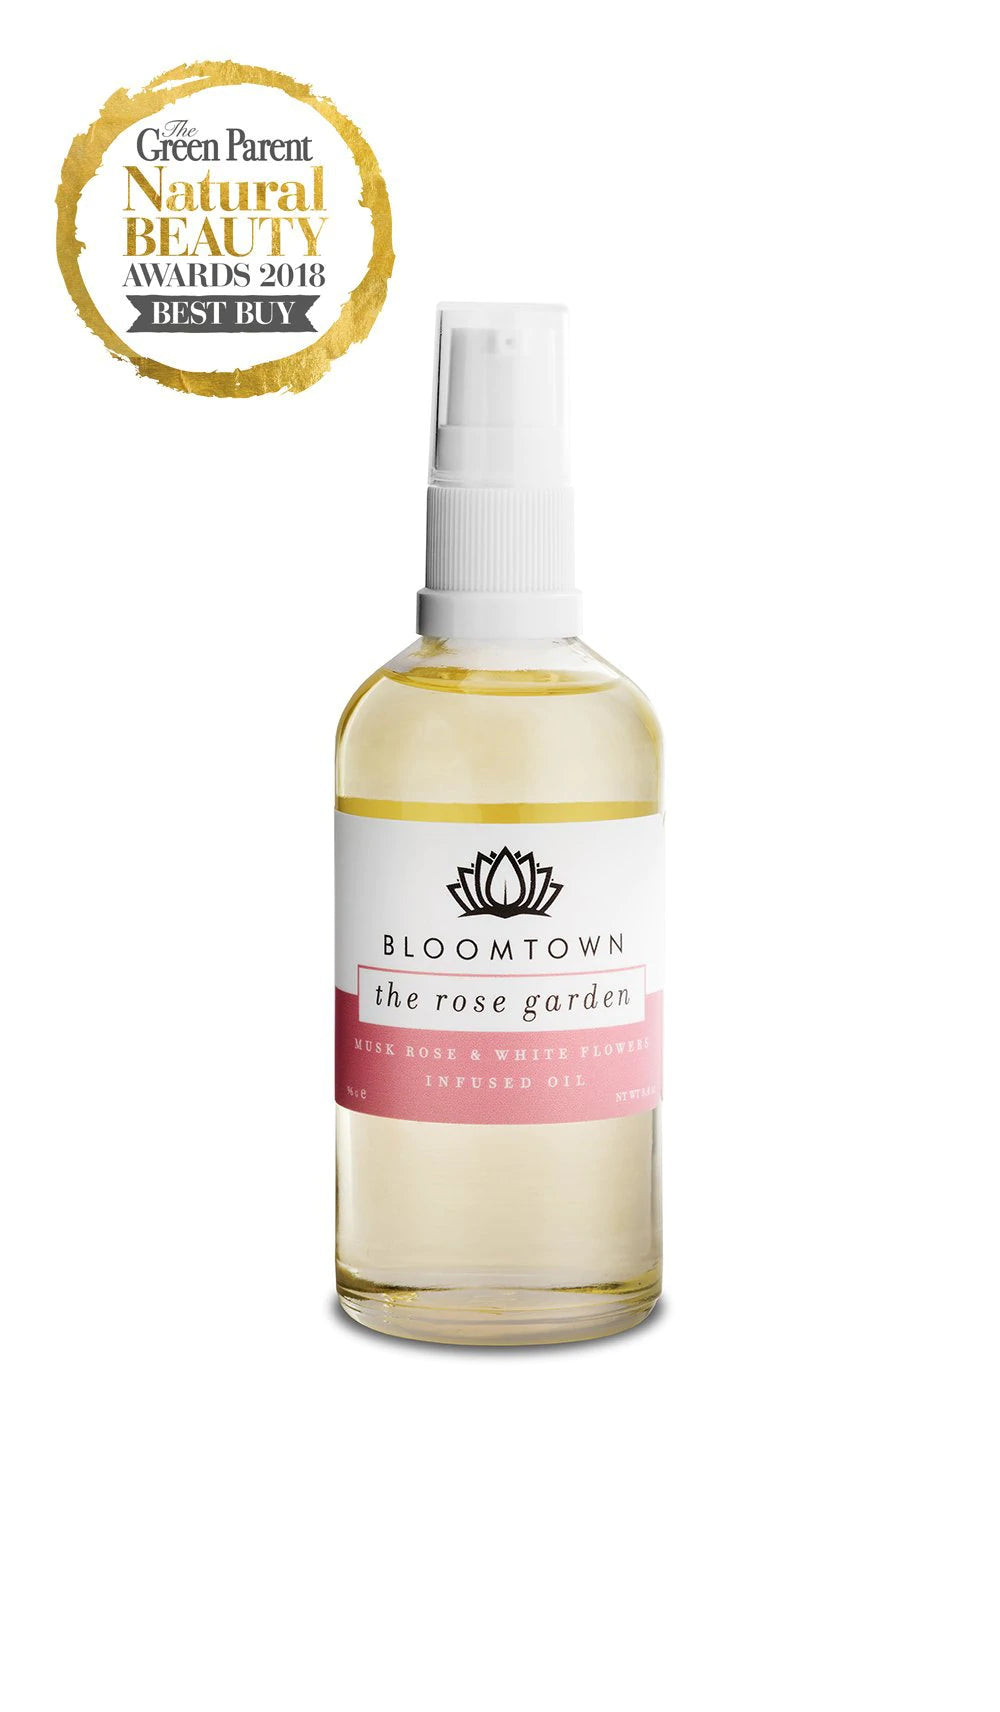 Bloomtown The Rose Garden Bath & Body Oil | Comforting blend Musk Rose & White Florals | Sustainably Sourced | Cruelty Free | Natural